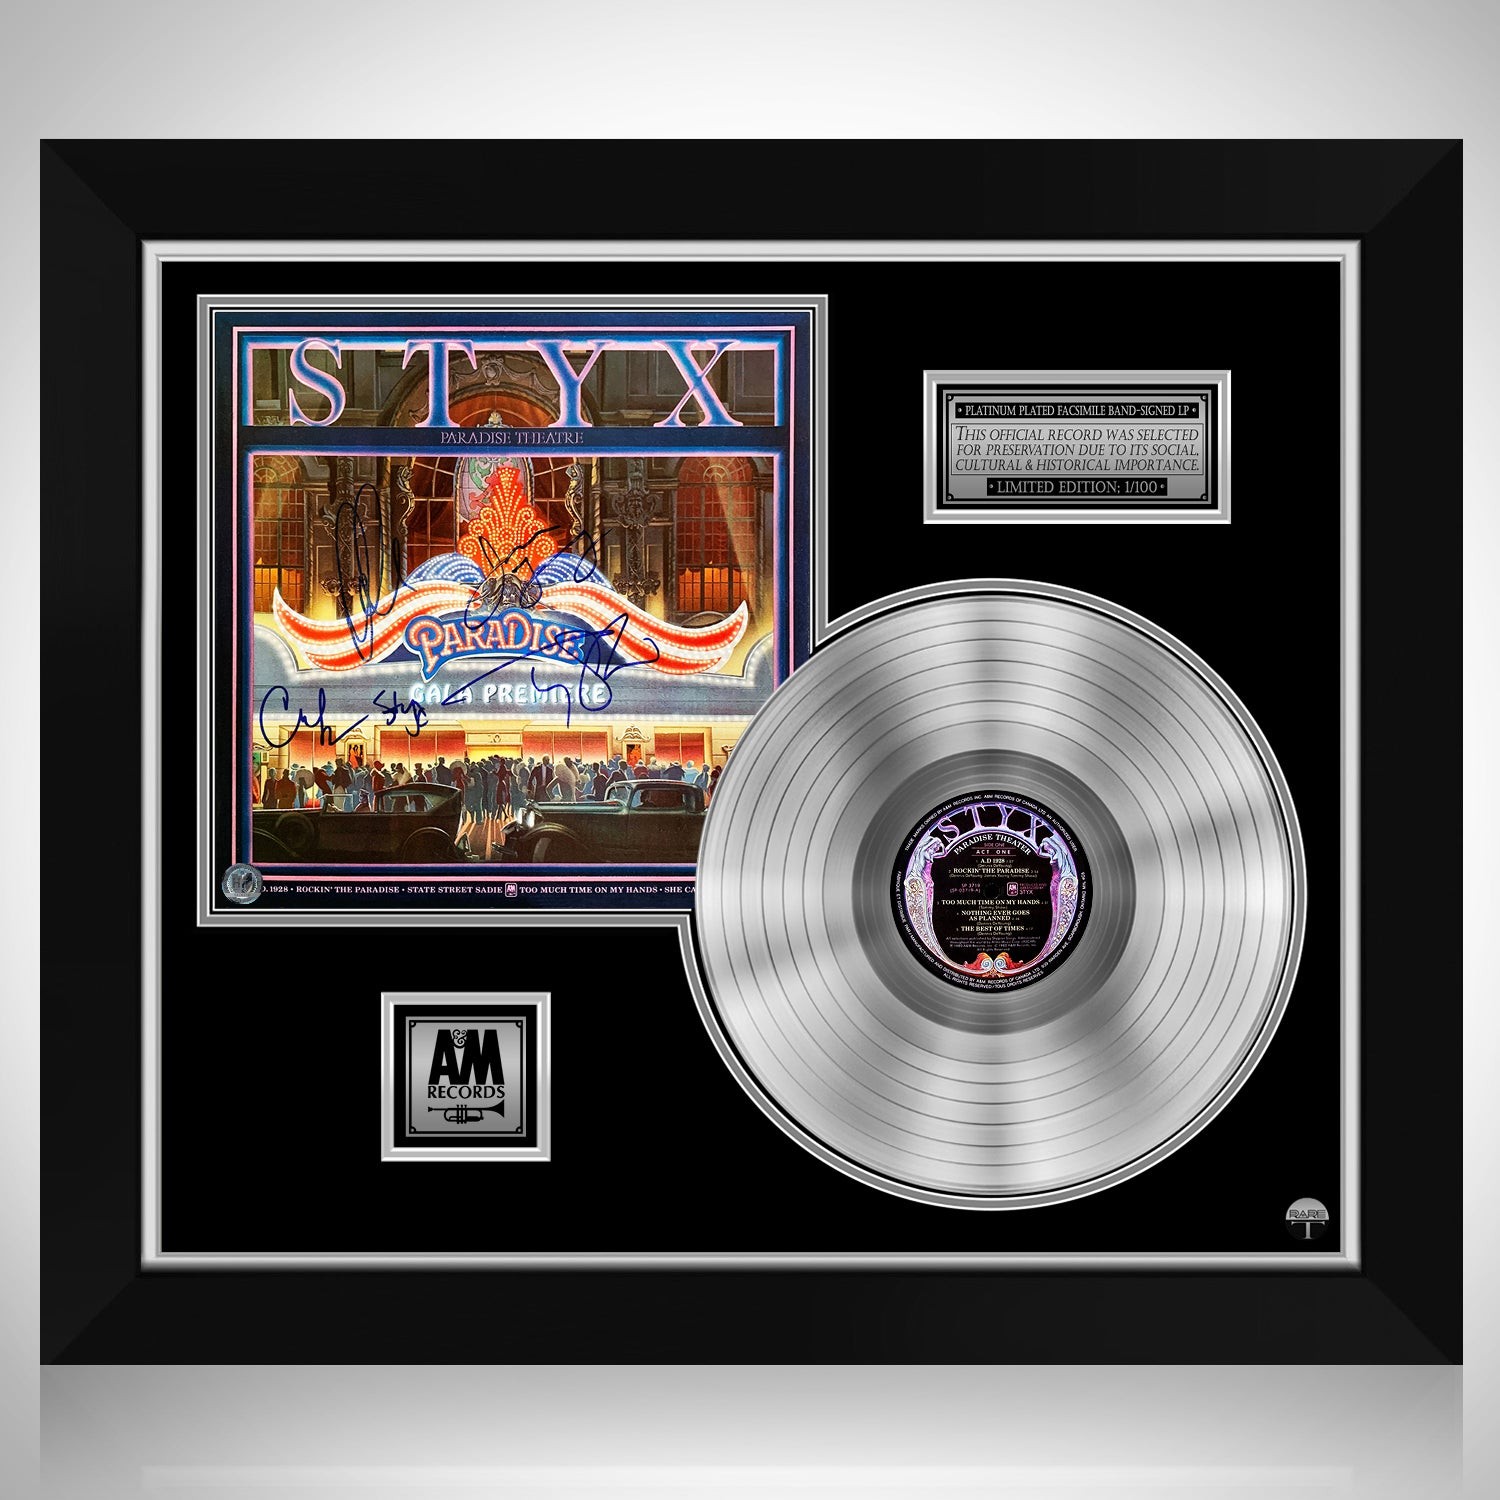 Arctic Monkeys - Whatever people say I am That's What I Am Not Platinum LP  Limited Signature Edition Custom Frame